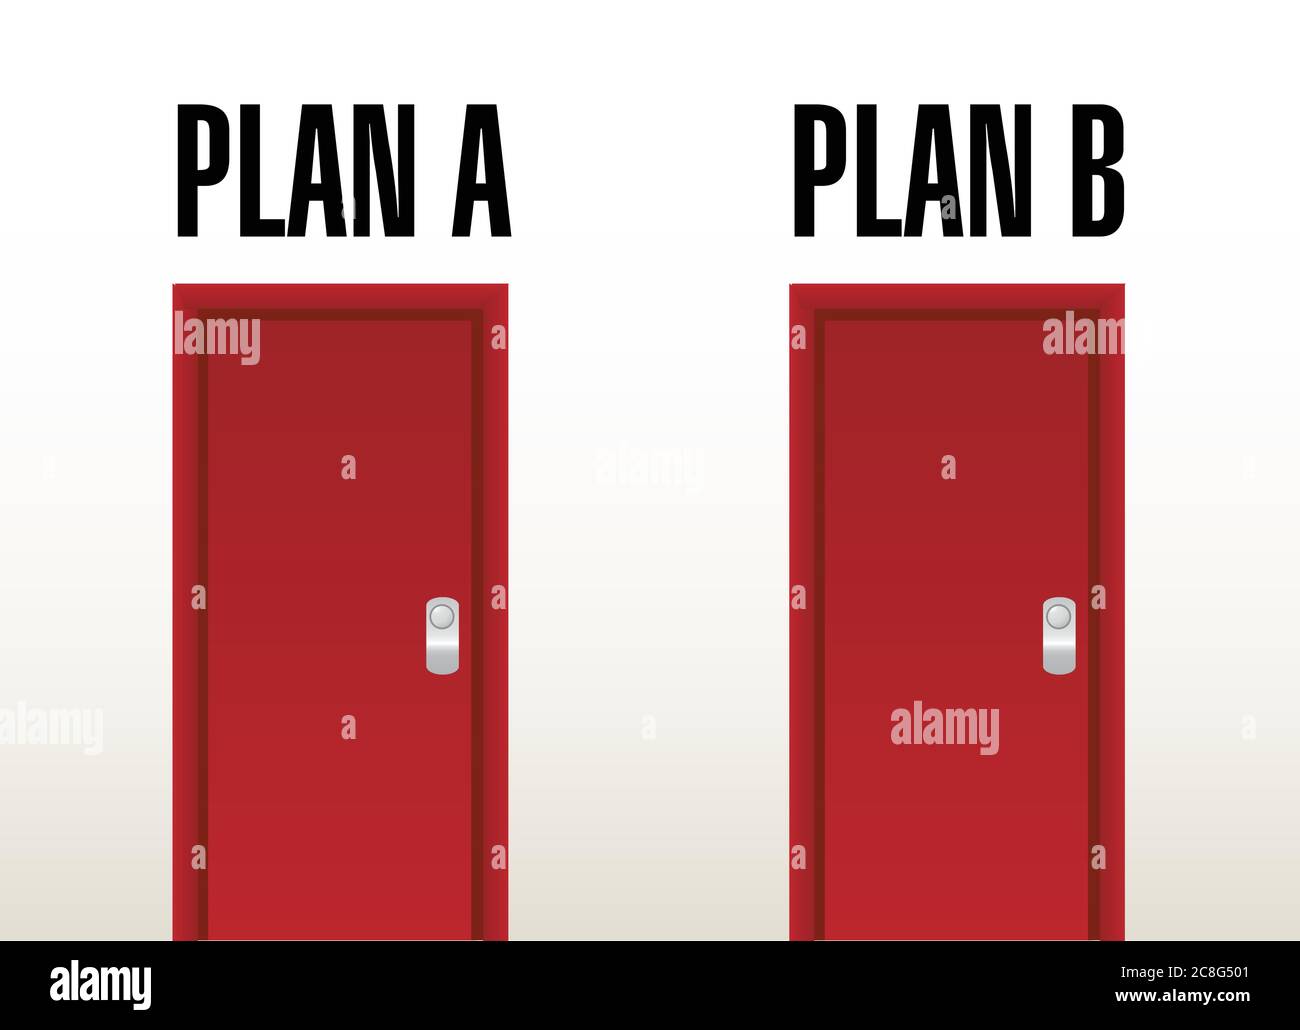 Plan A plan B option doors illustration design over a white background Stock Vector